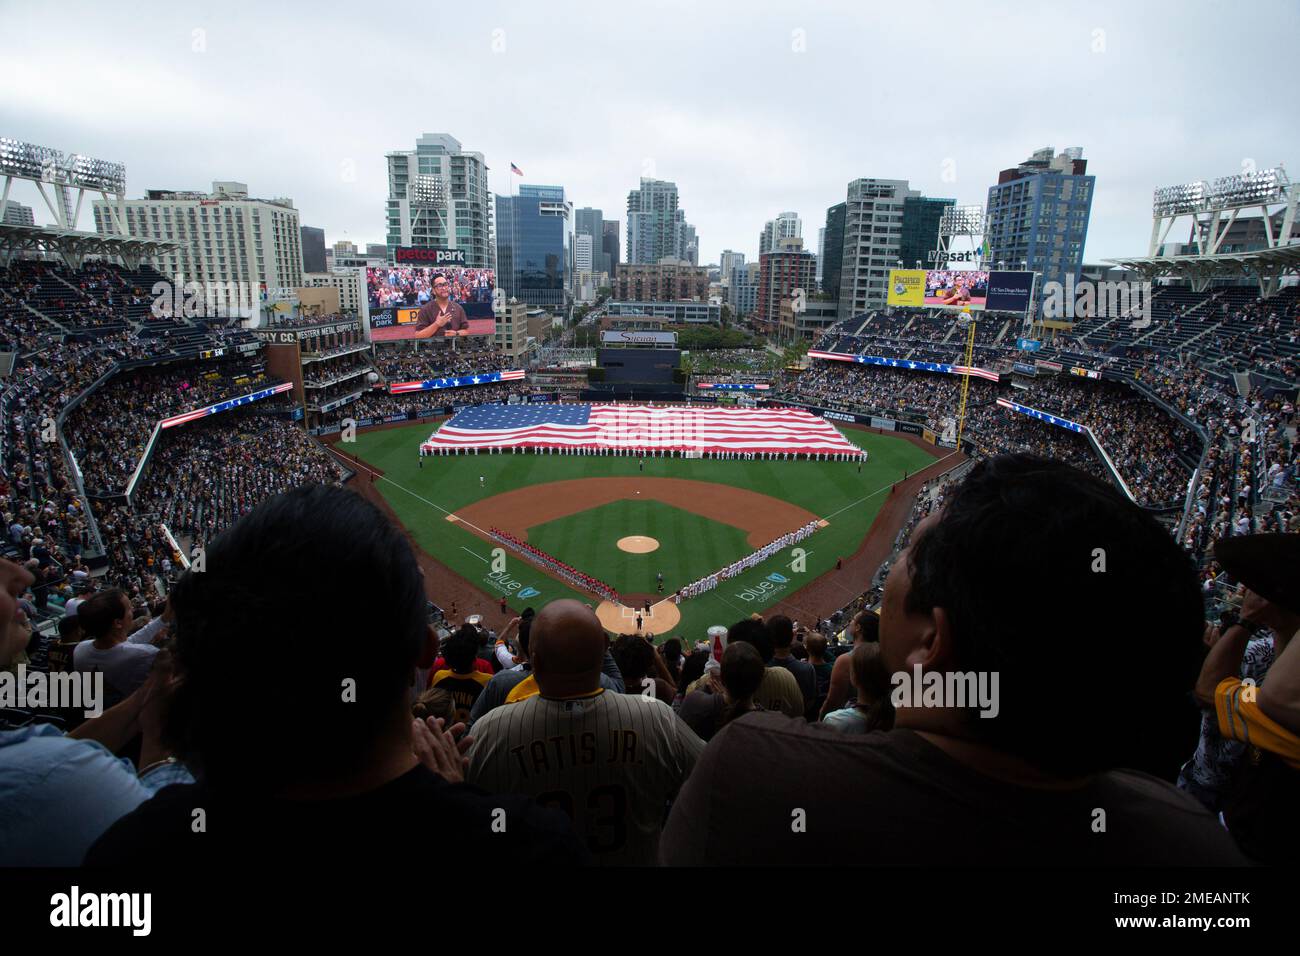 A giant American flag is displayed during the national anthem prior to a baseball game between the San Diego Padres and the Cincinnati Reds Thursday, June 17, 2021, in San Diego. Petco Park opened up for full capacity viewing of a baseball game without masks for the first time since the 2019 season. (AP Photo/Derrick Tuskan) Stock Photo